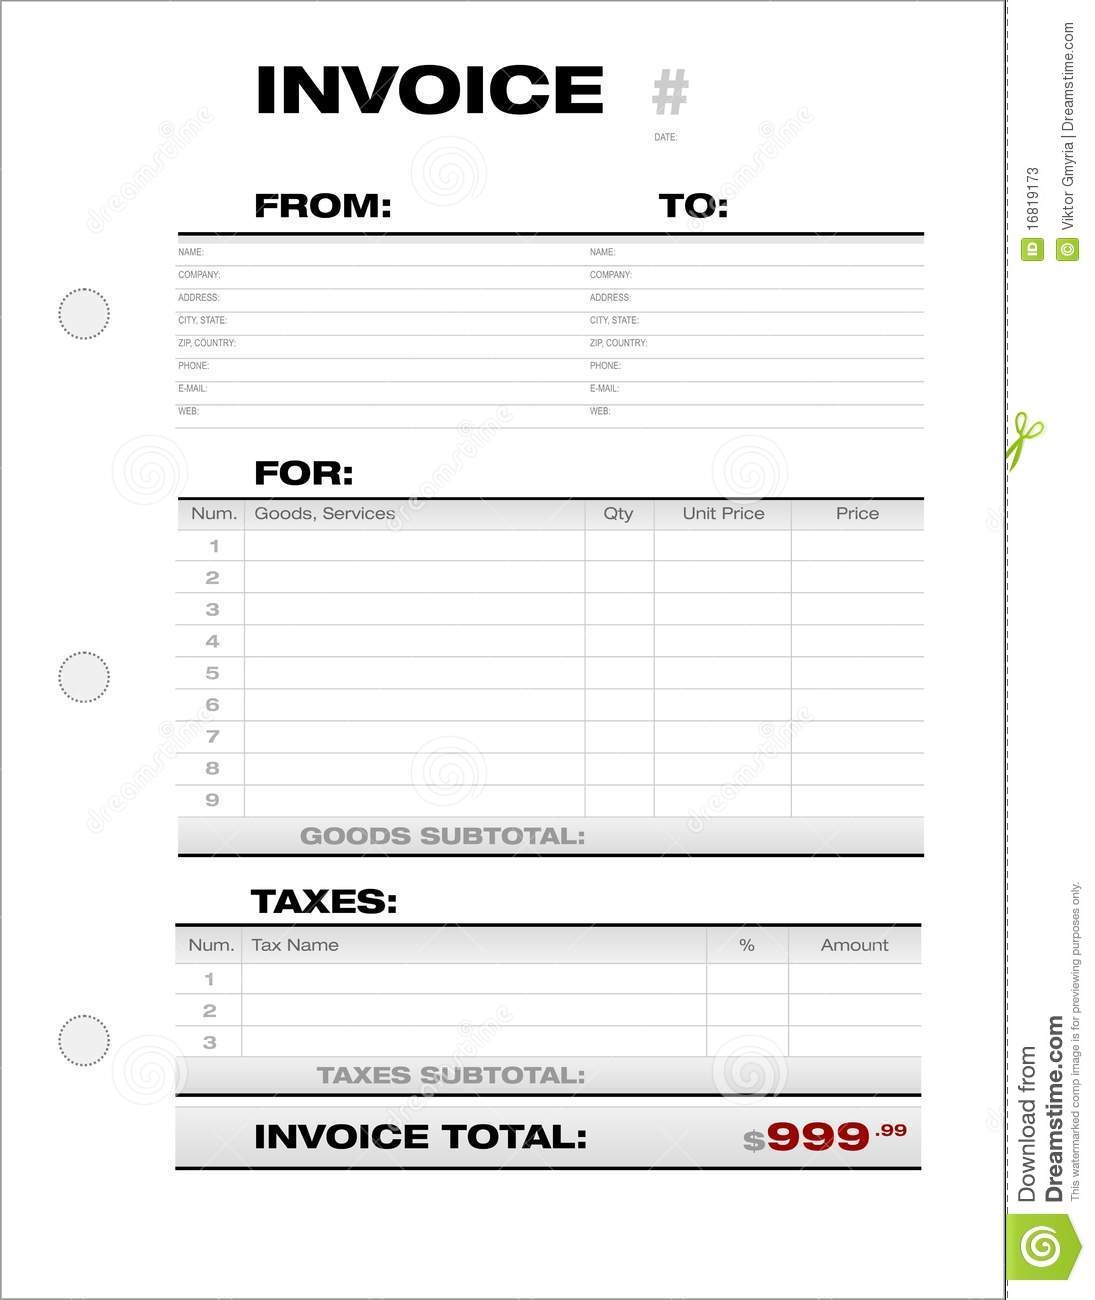 blank invoice stock photos image 16819173 blank invoice download